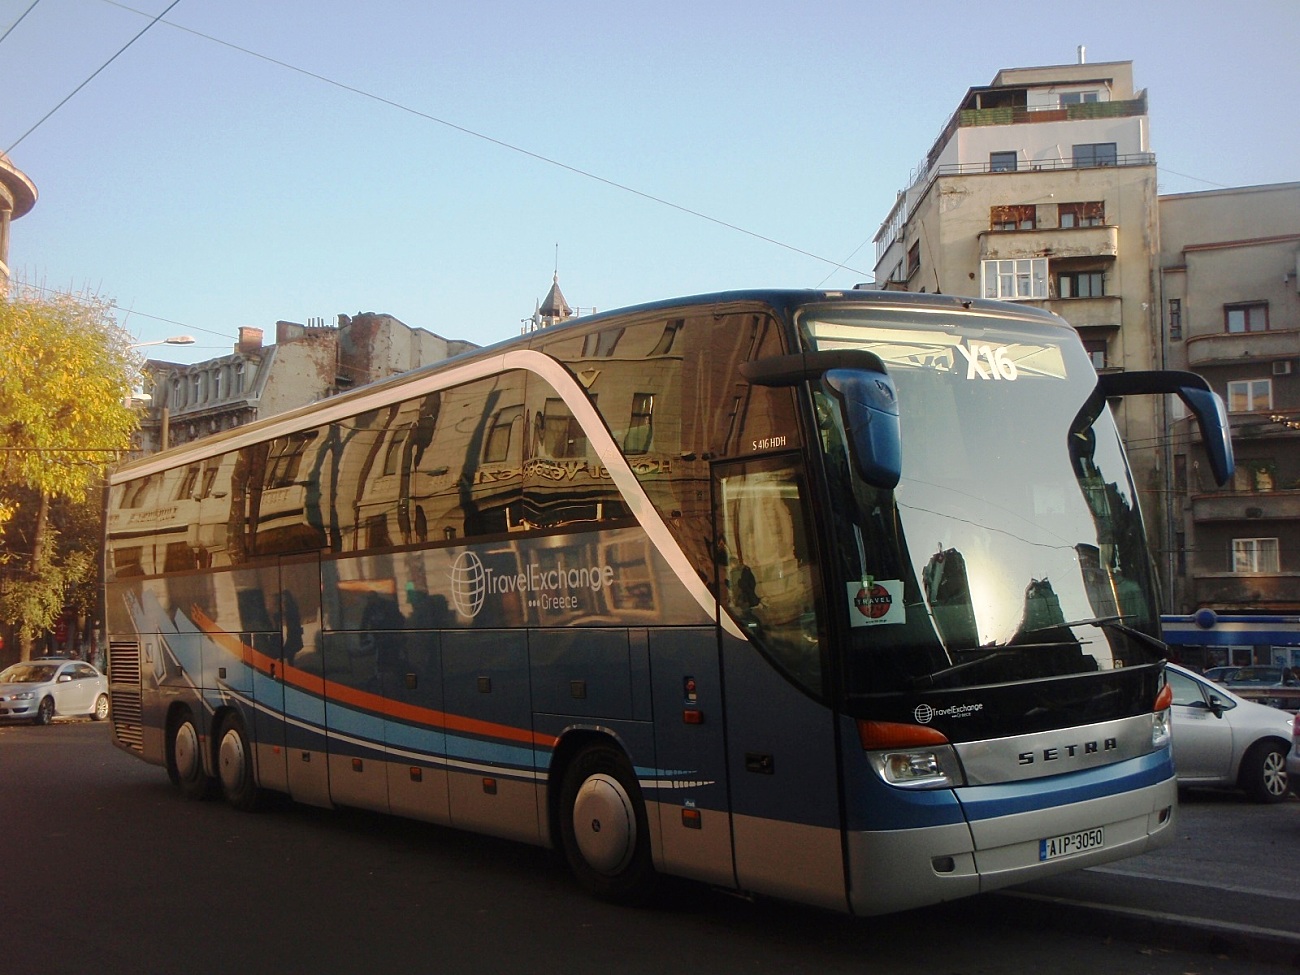 Setra S416 HDH #AIP 3050